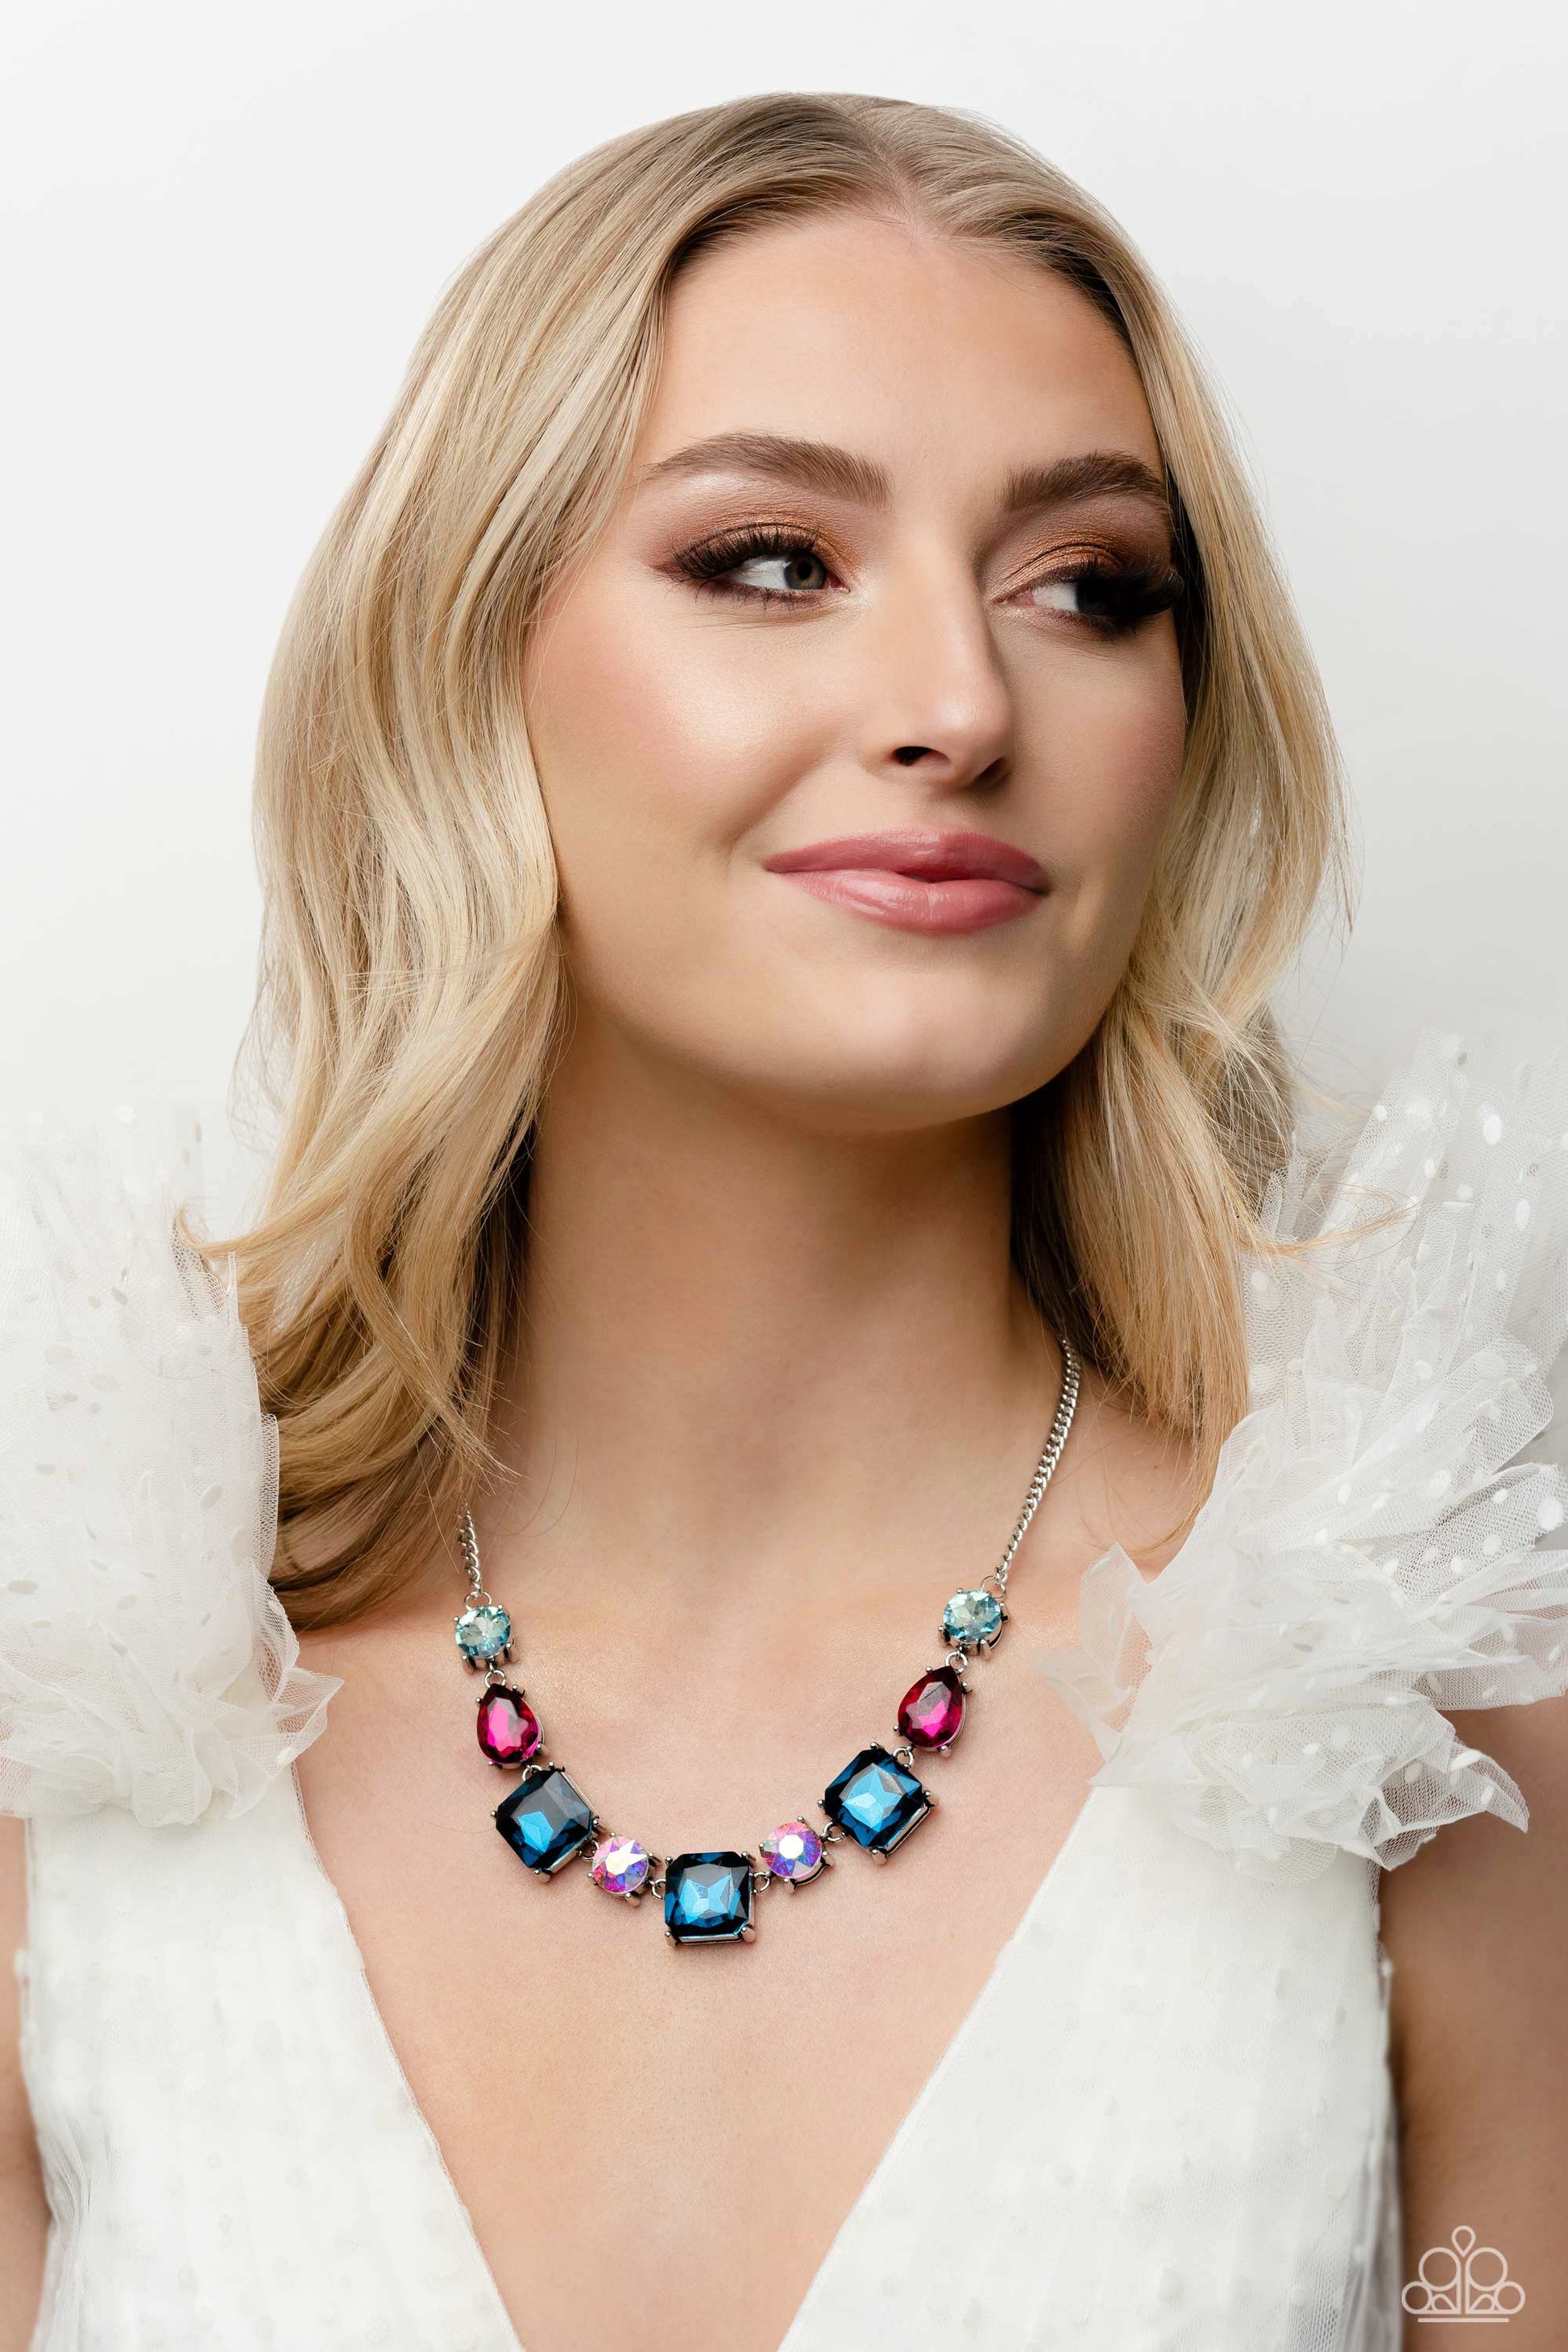 ﻿Elevated Edge Multi Necklace - Paparazzi Accessories  Encased within thick, pronged, elevated silver settings, a geometric collection of fuchsia, light blue, dark blue, and iridescent rhinestones, featured in square, teardrop, and round shapes coalesces down the neckline for a gritty, yet glamorous display. Features an adjustable clasp closure. Due to its prismatic palette, color may vary.  Sold as one individual necklace. Includes one pair of matching earrings.  P2RE-MTXX-215XX